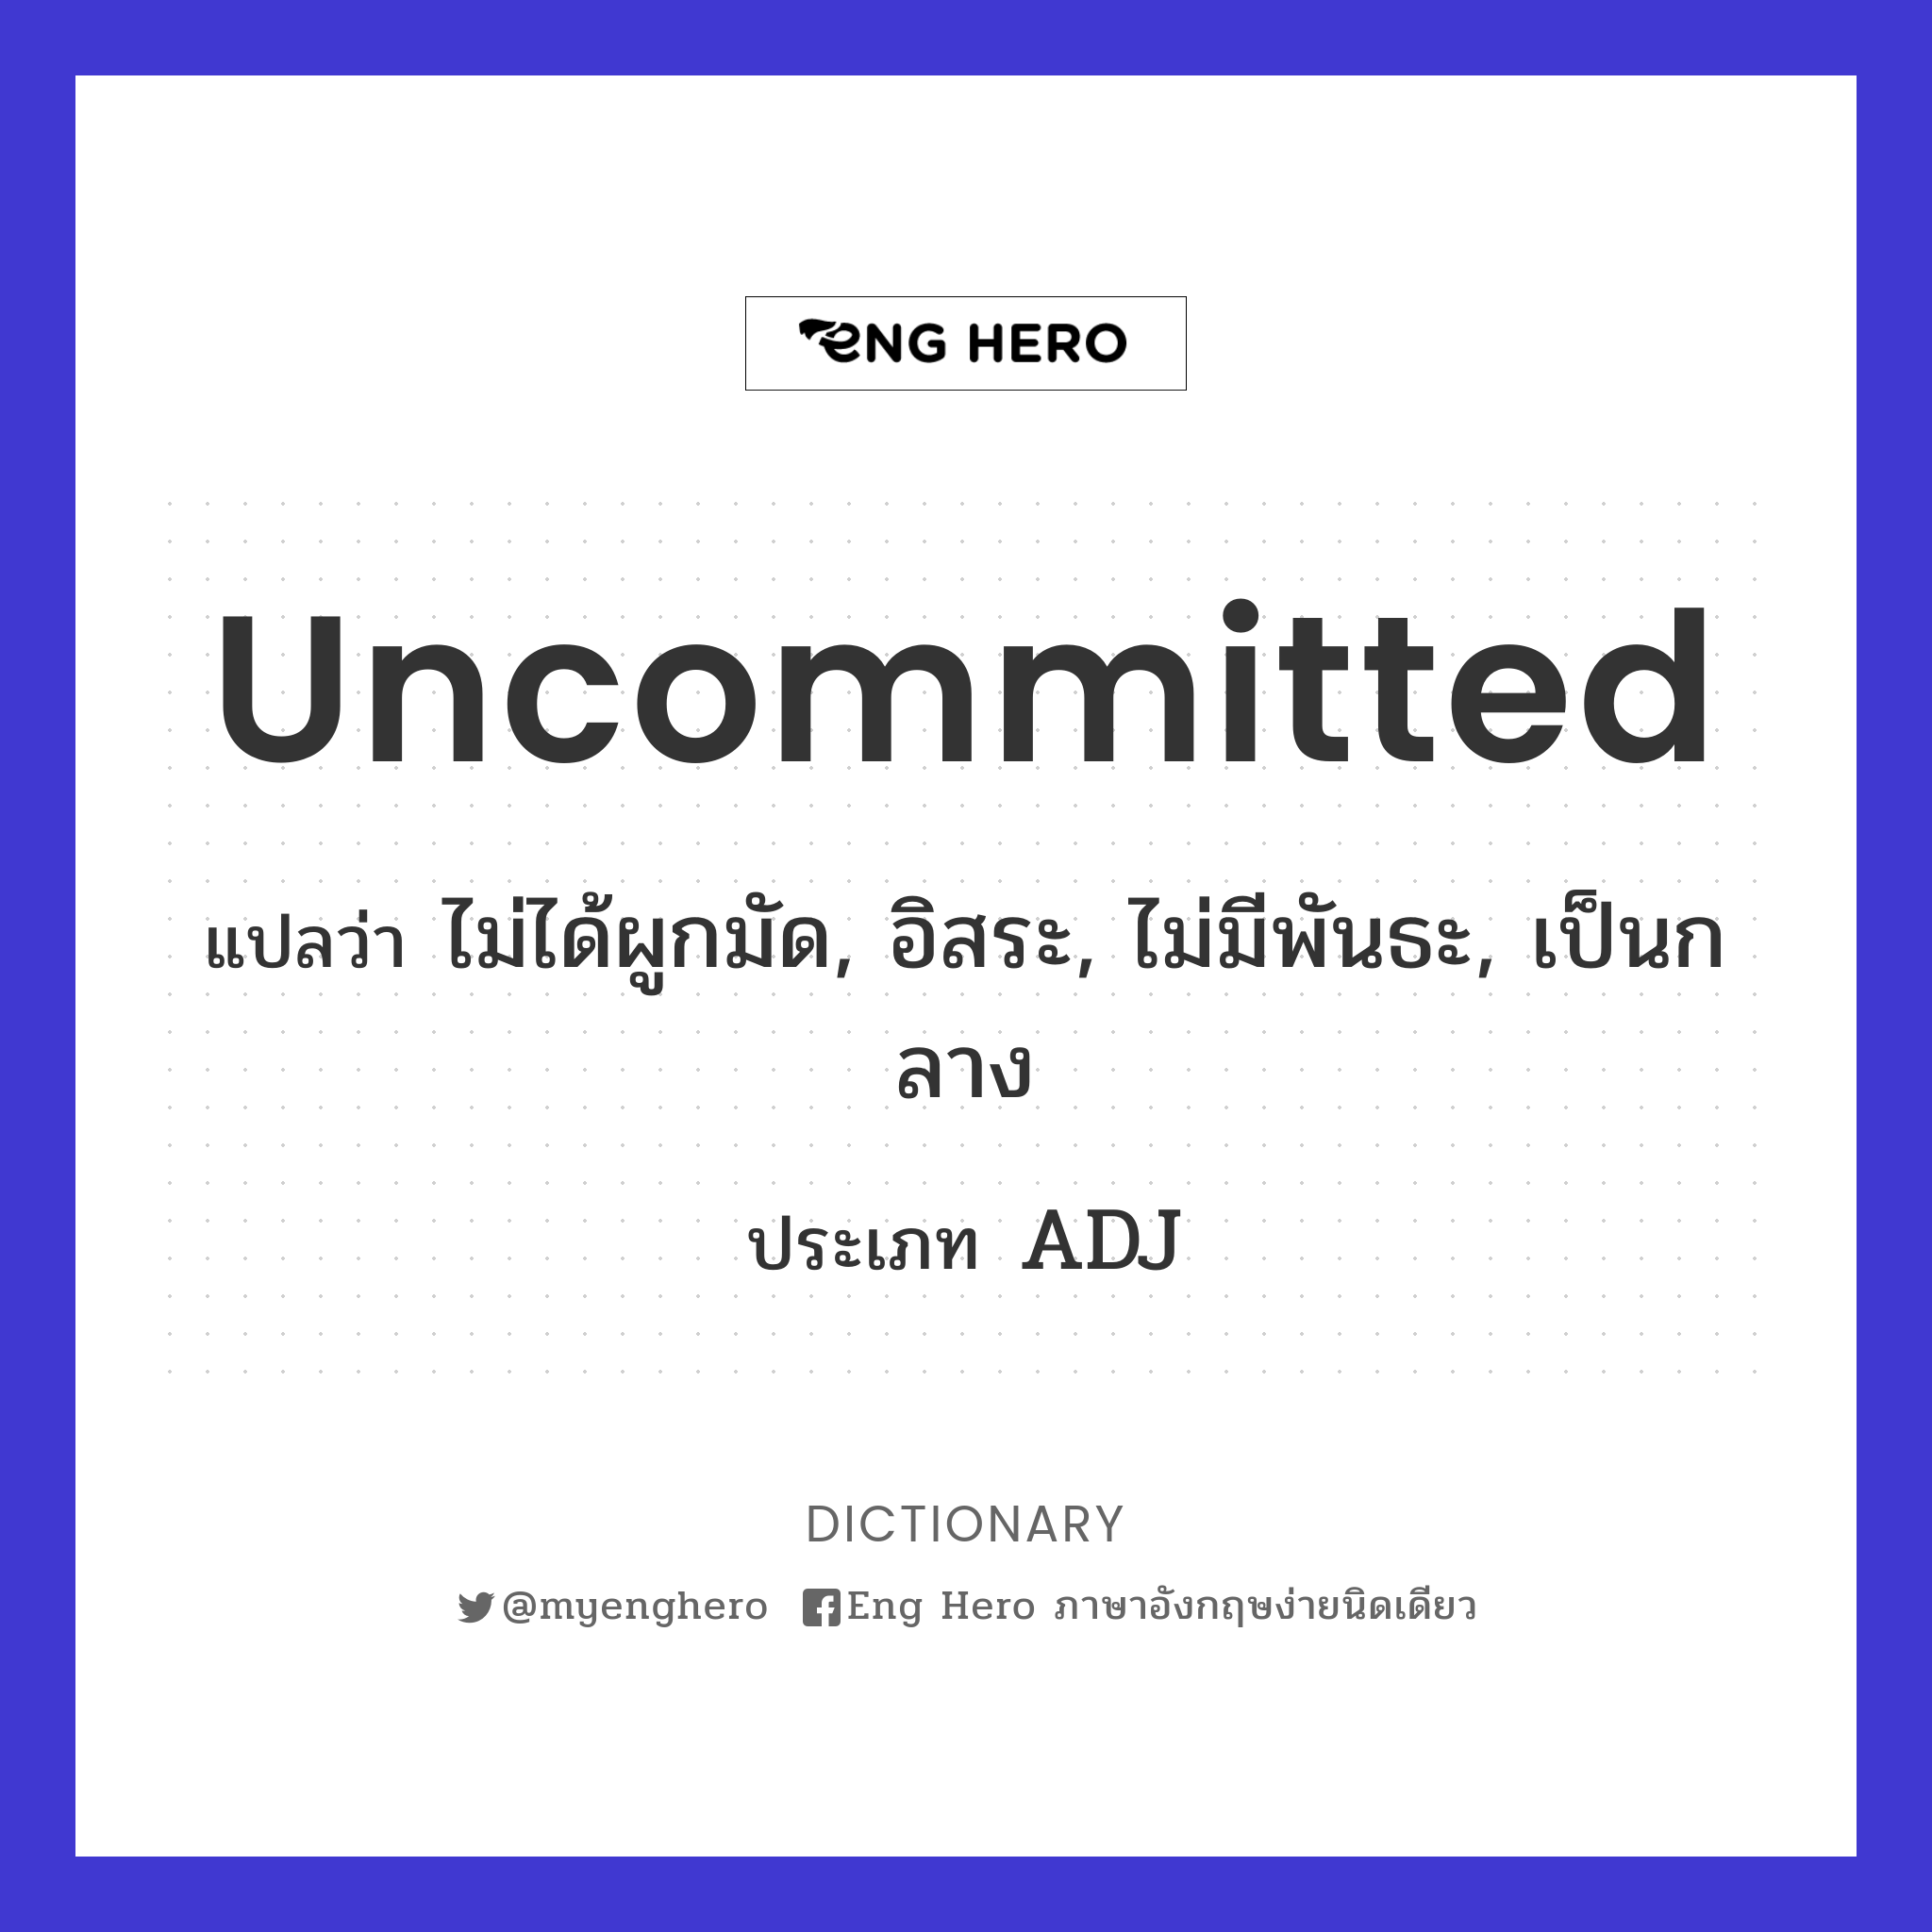 uncommitted